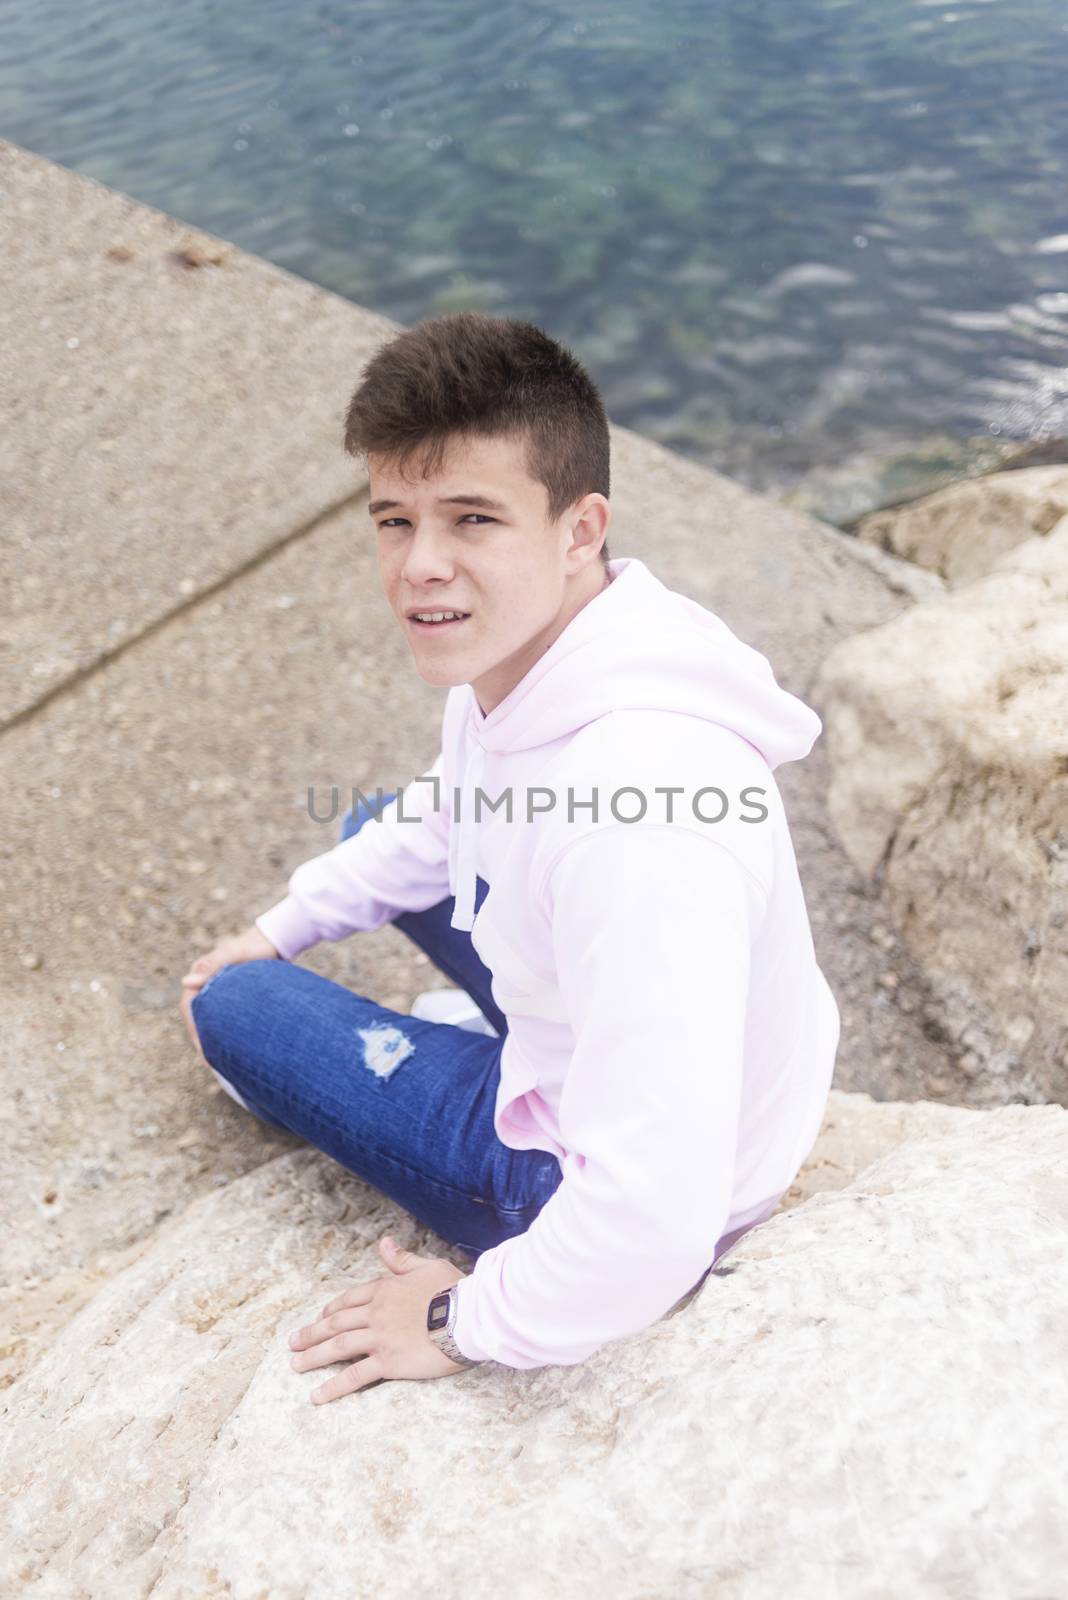 Young teenager male sitting on breakwaters while looking at camera